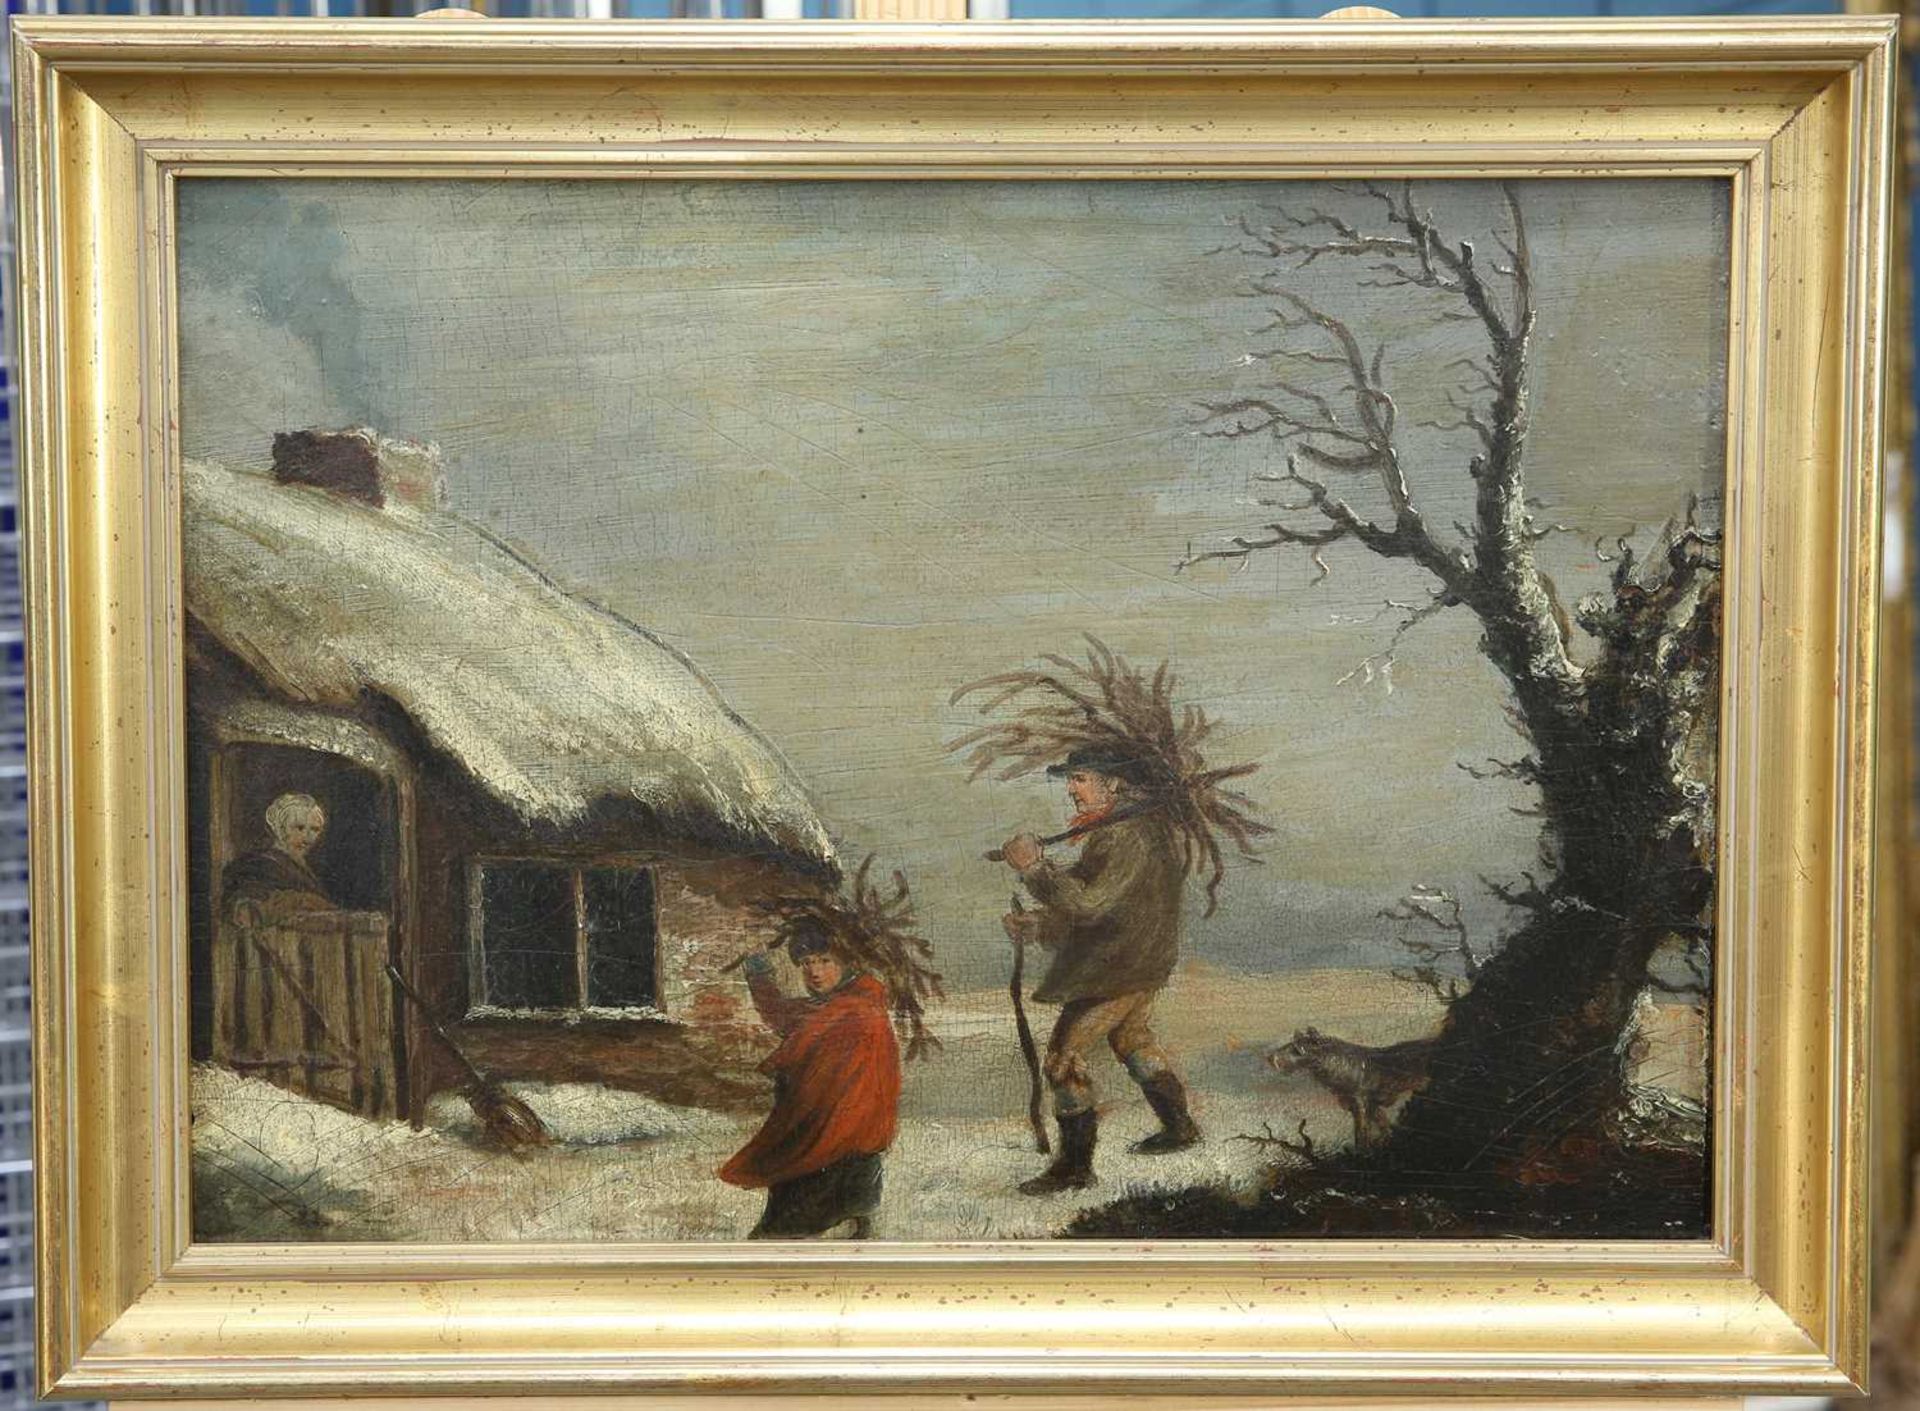 ENGLISH NAIVE SCHOOL FIGURES COLLECTING WOOD OUTSIDE A COTTAGE - Image 2 of 2